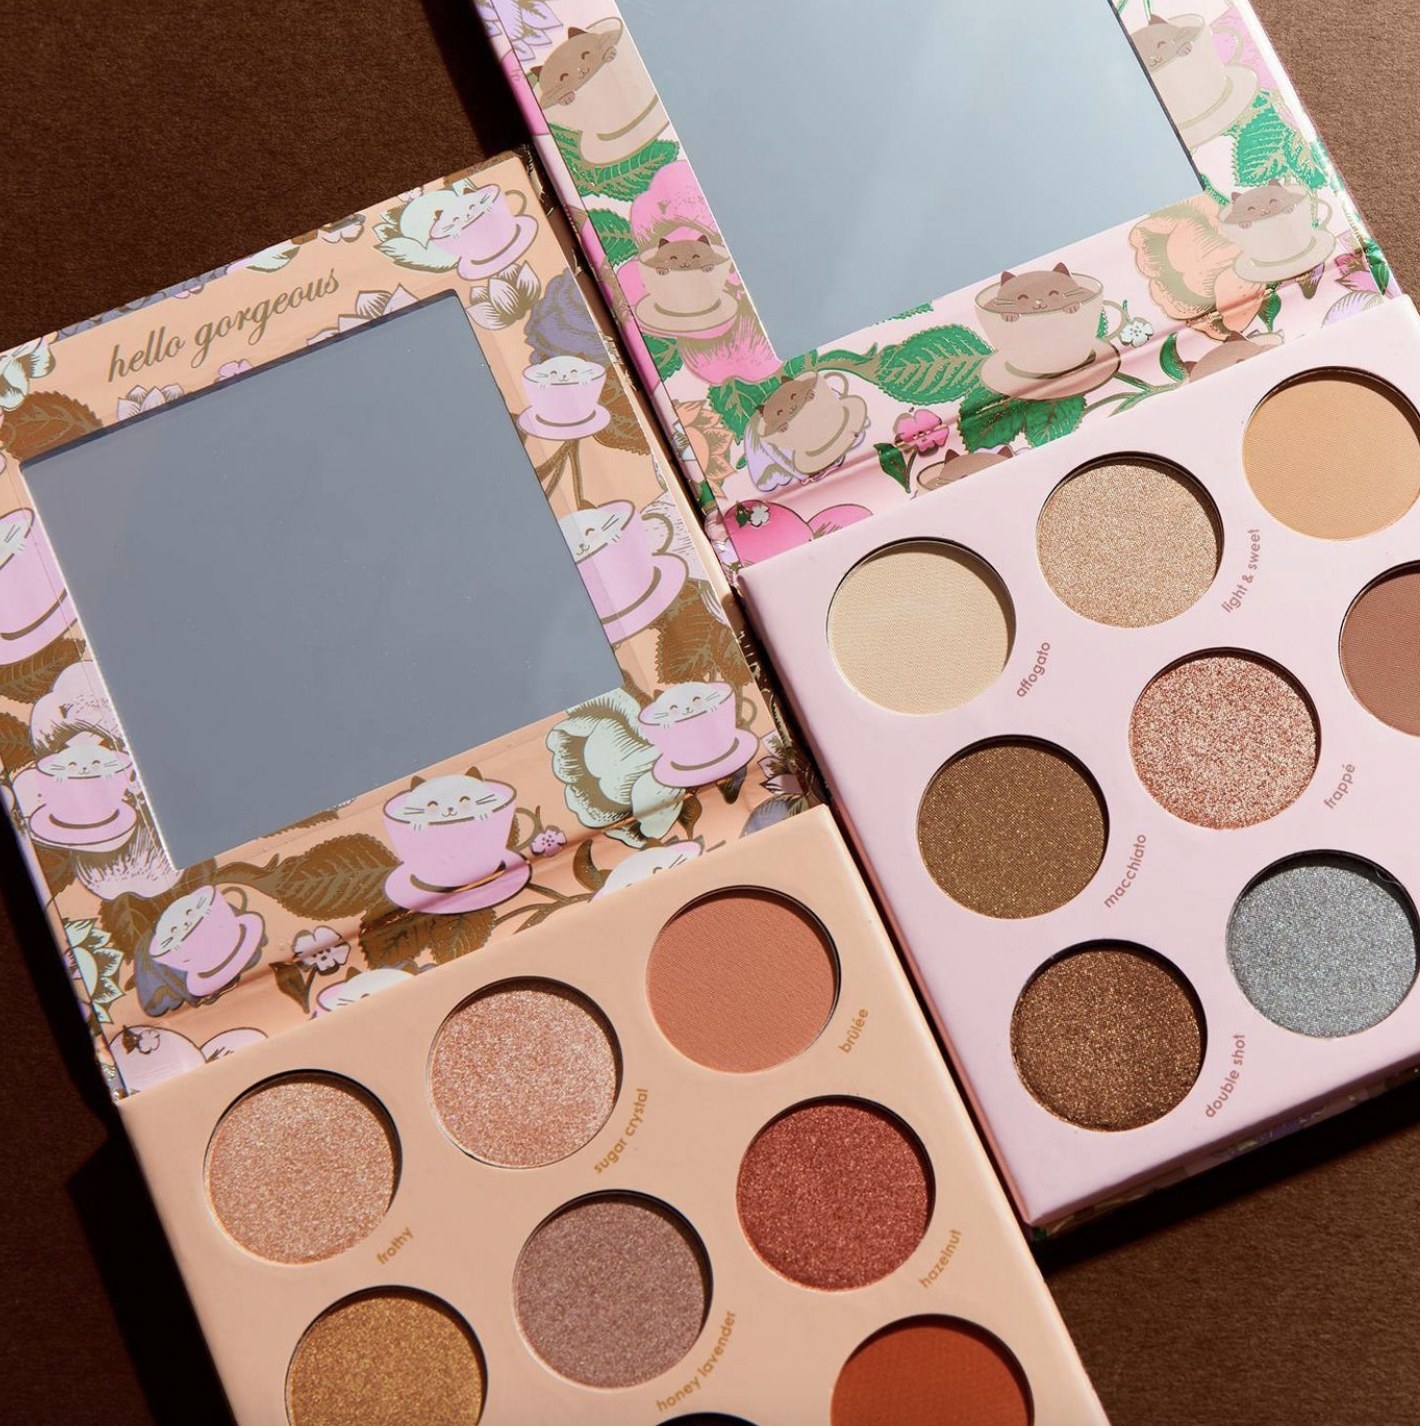 A set of eyeshadow palettes with warm and cool shades